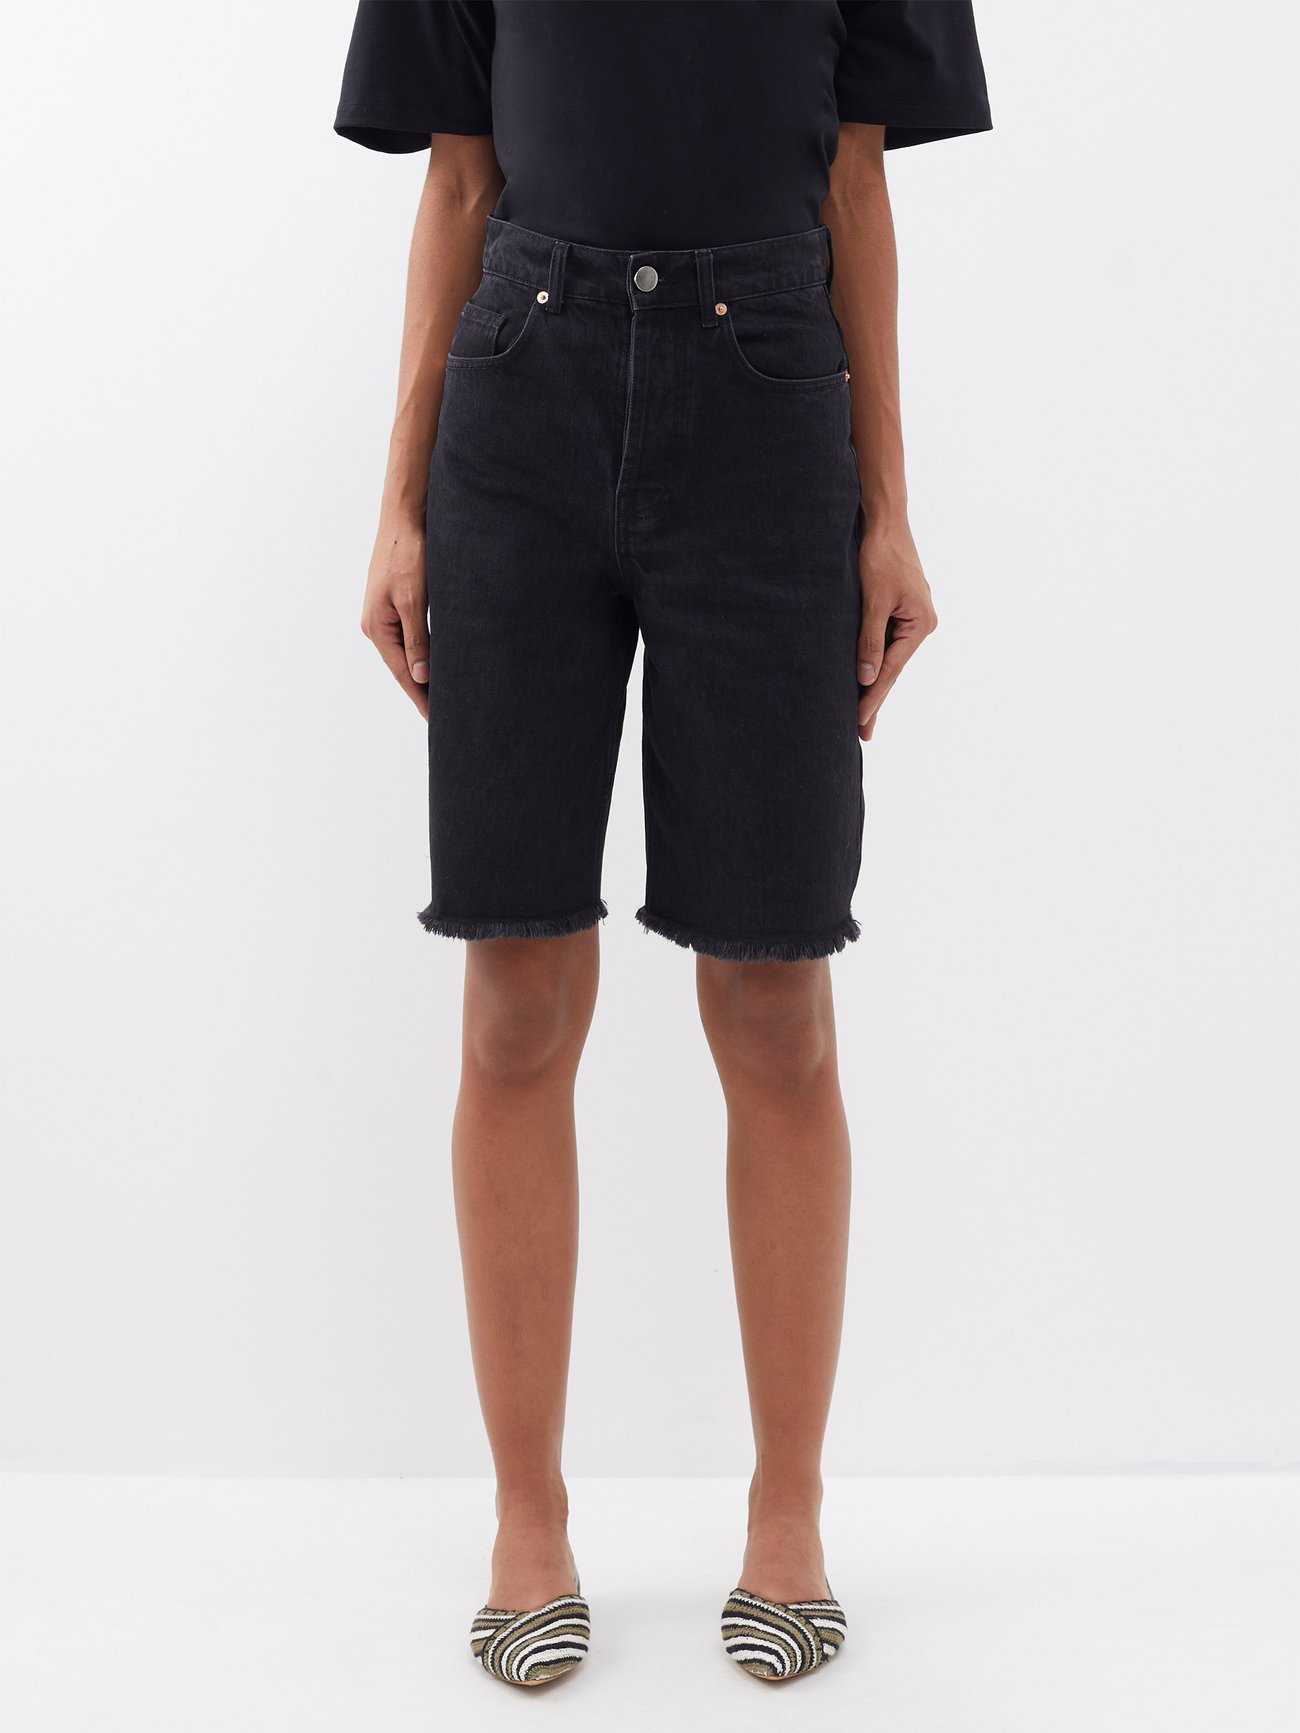 jorts trend 2024 - Raey’s longline black 90s denim shorts are made from mid-weight organic-cotton denim with a high-rise waist and five pockets, capturing the retro mood.